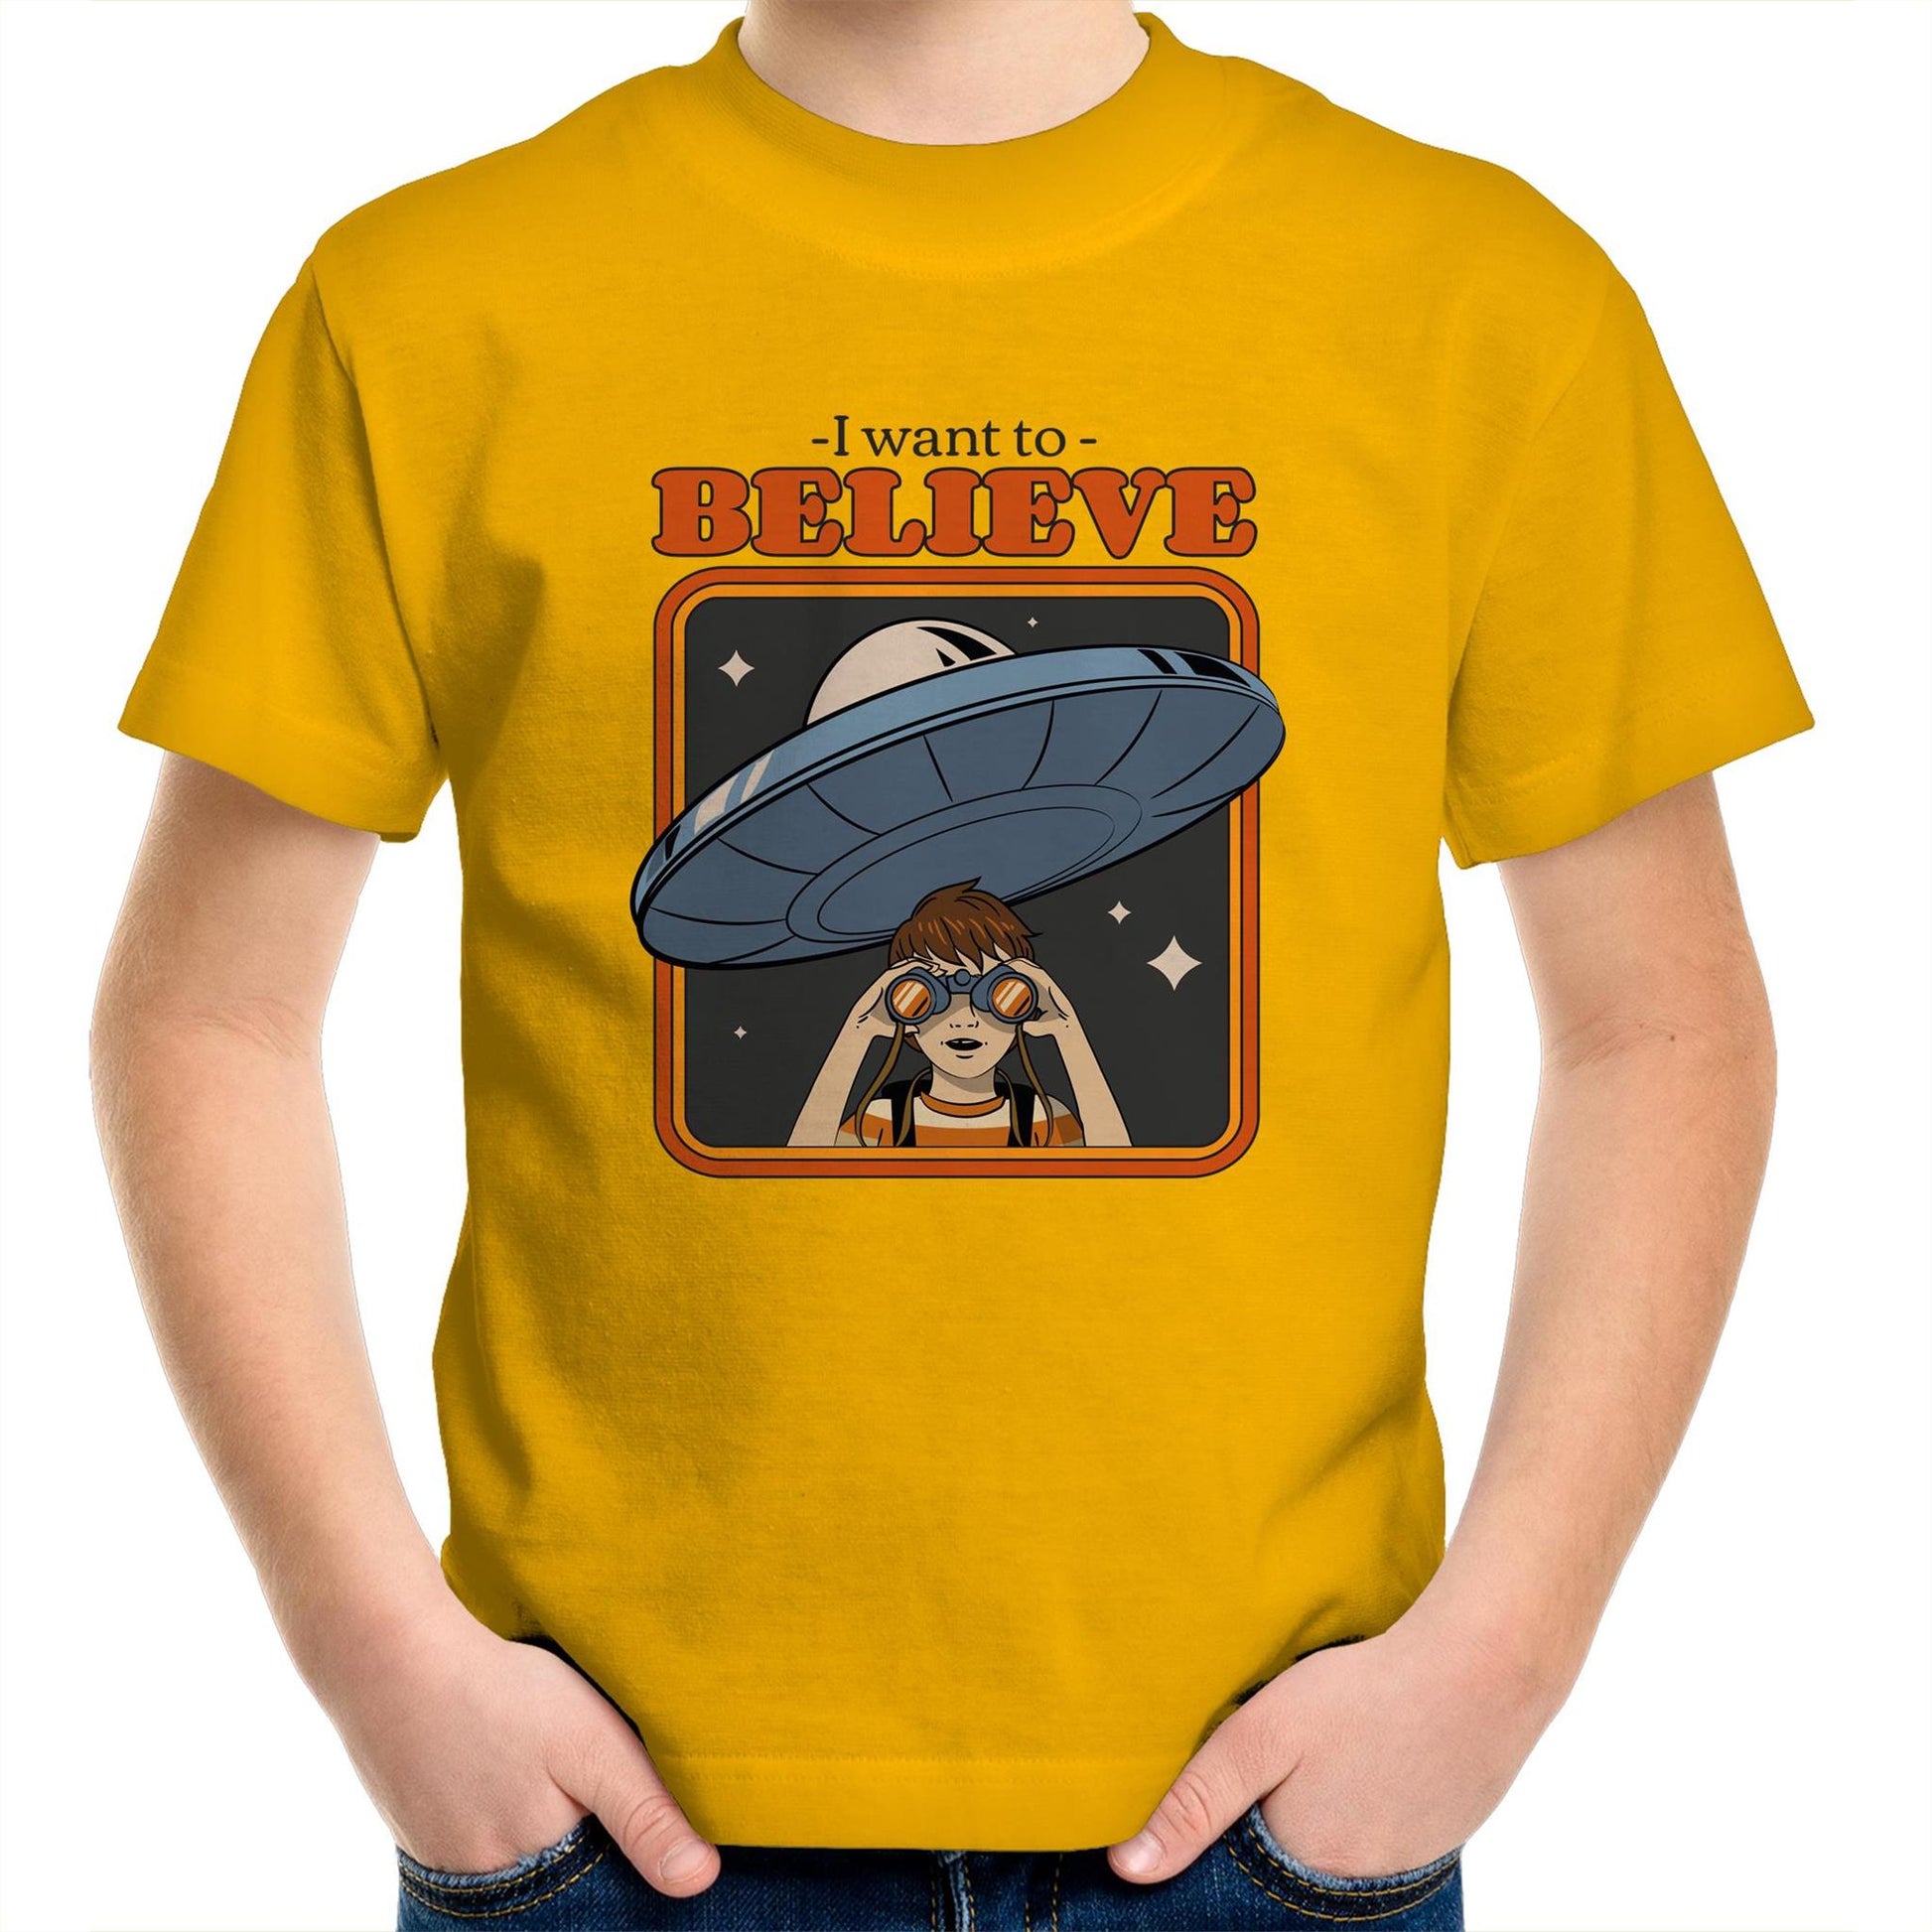 I Want To Believe - Kids Youth Crew T-Shirt Gold Kids Youth T-shirt Sci Fi